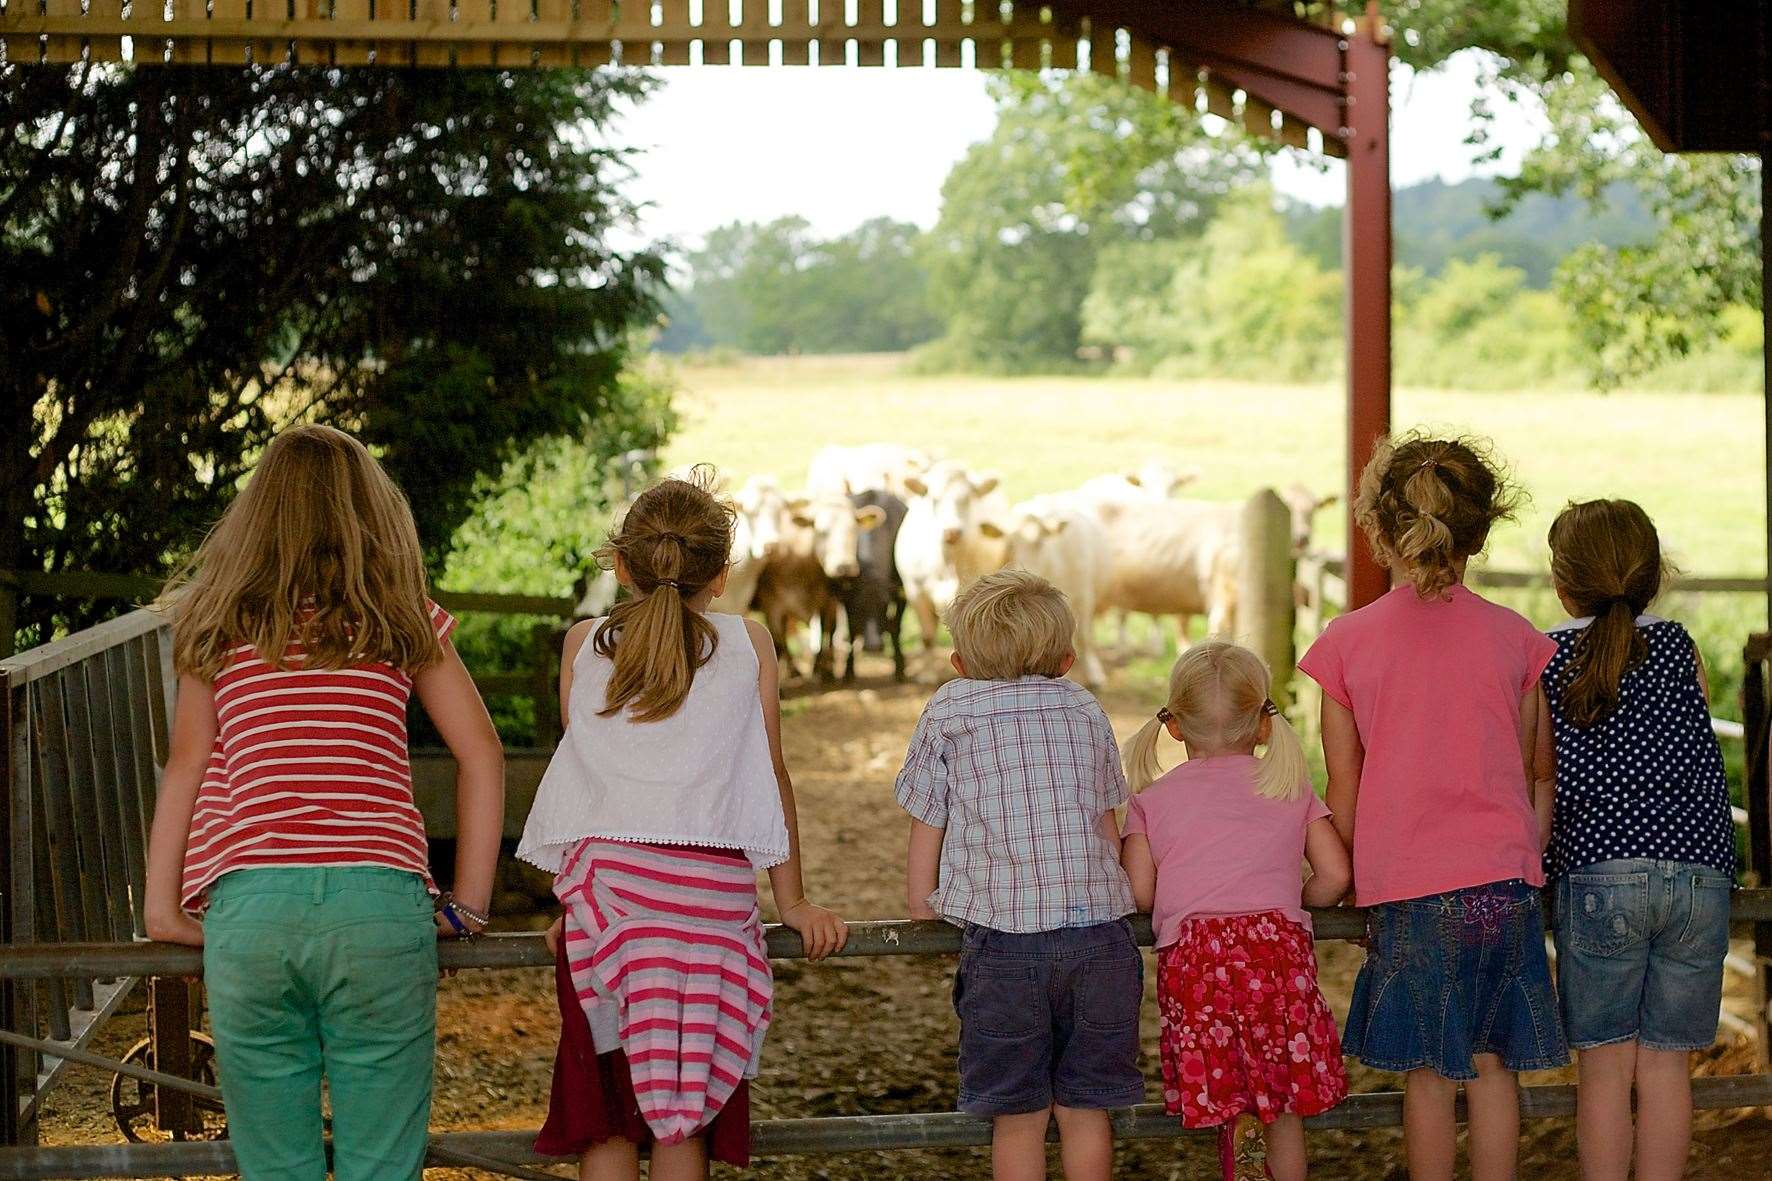 Open Farm Sunday takes place on June 9